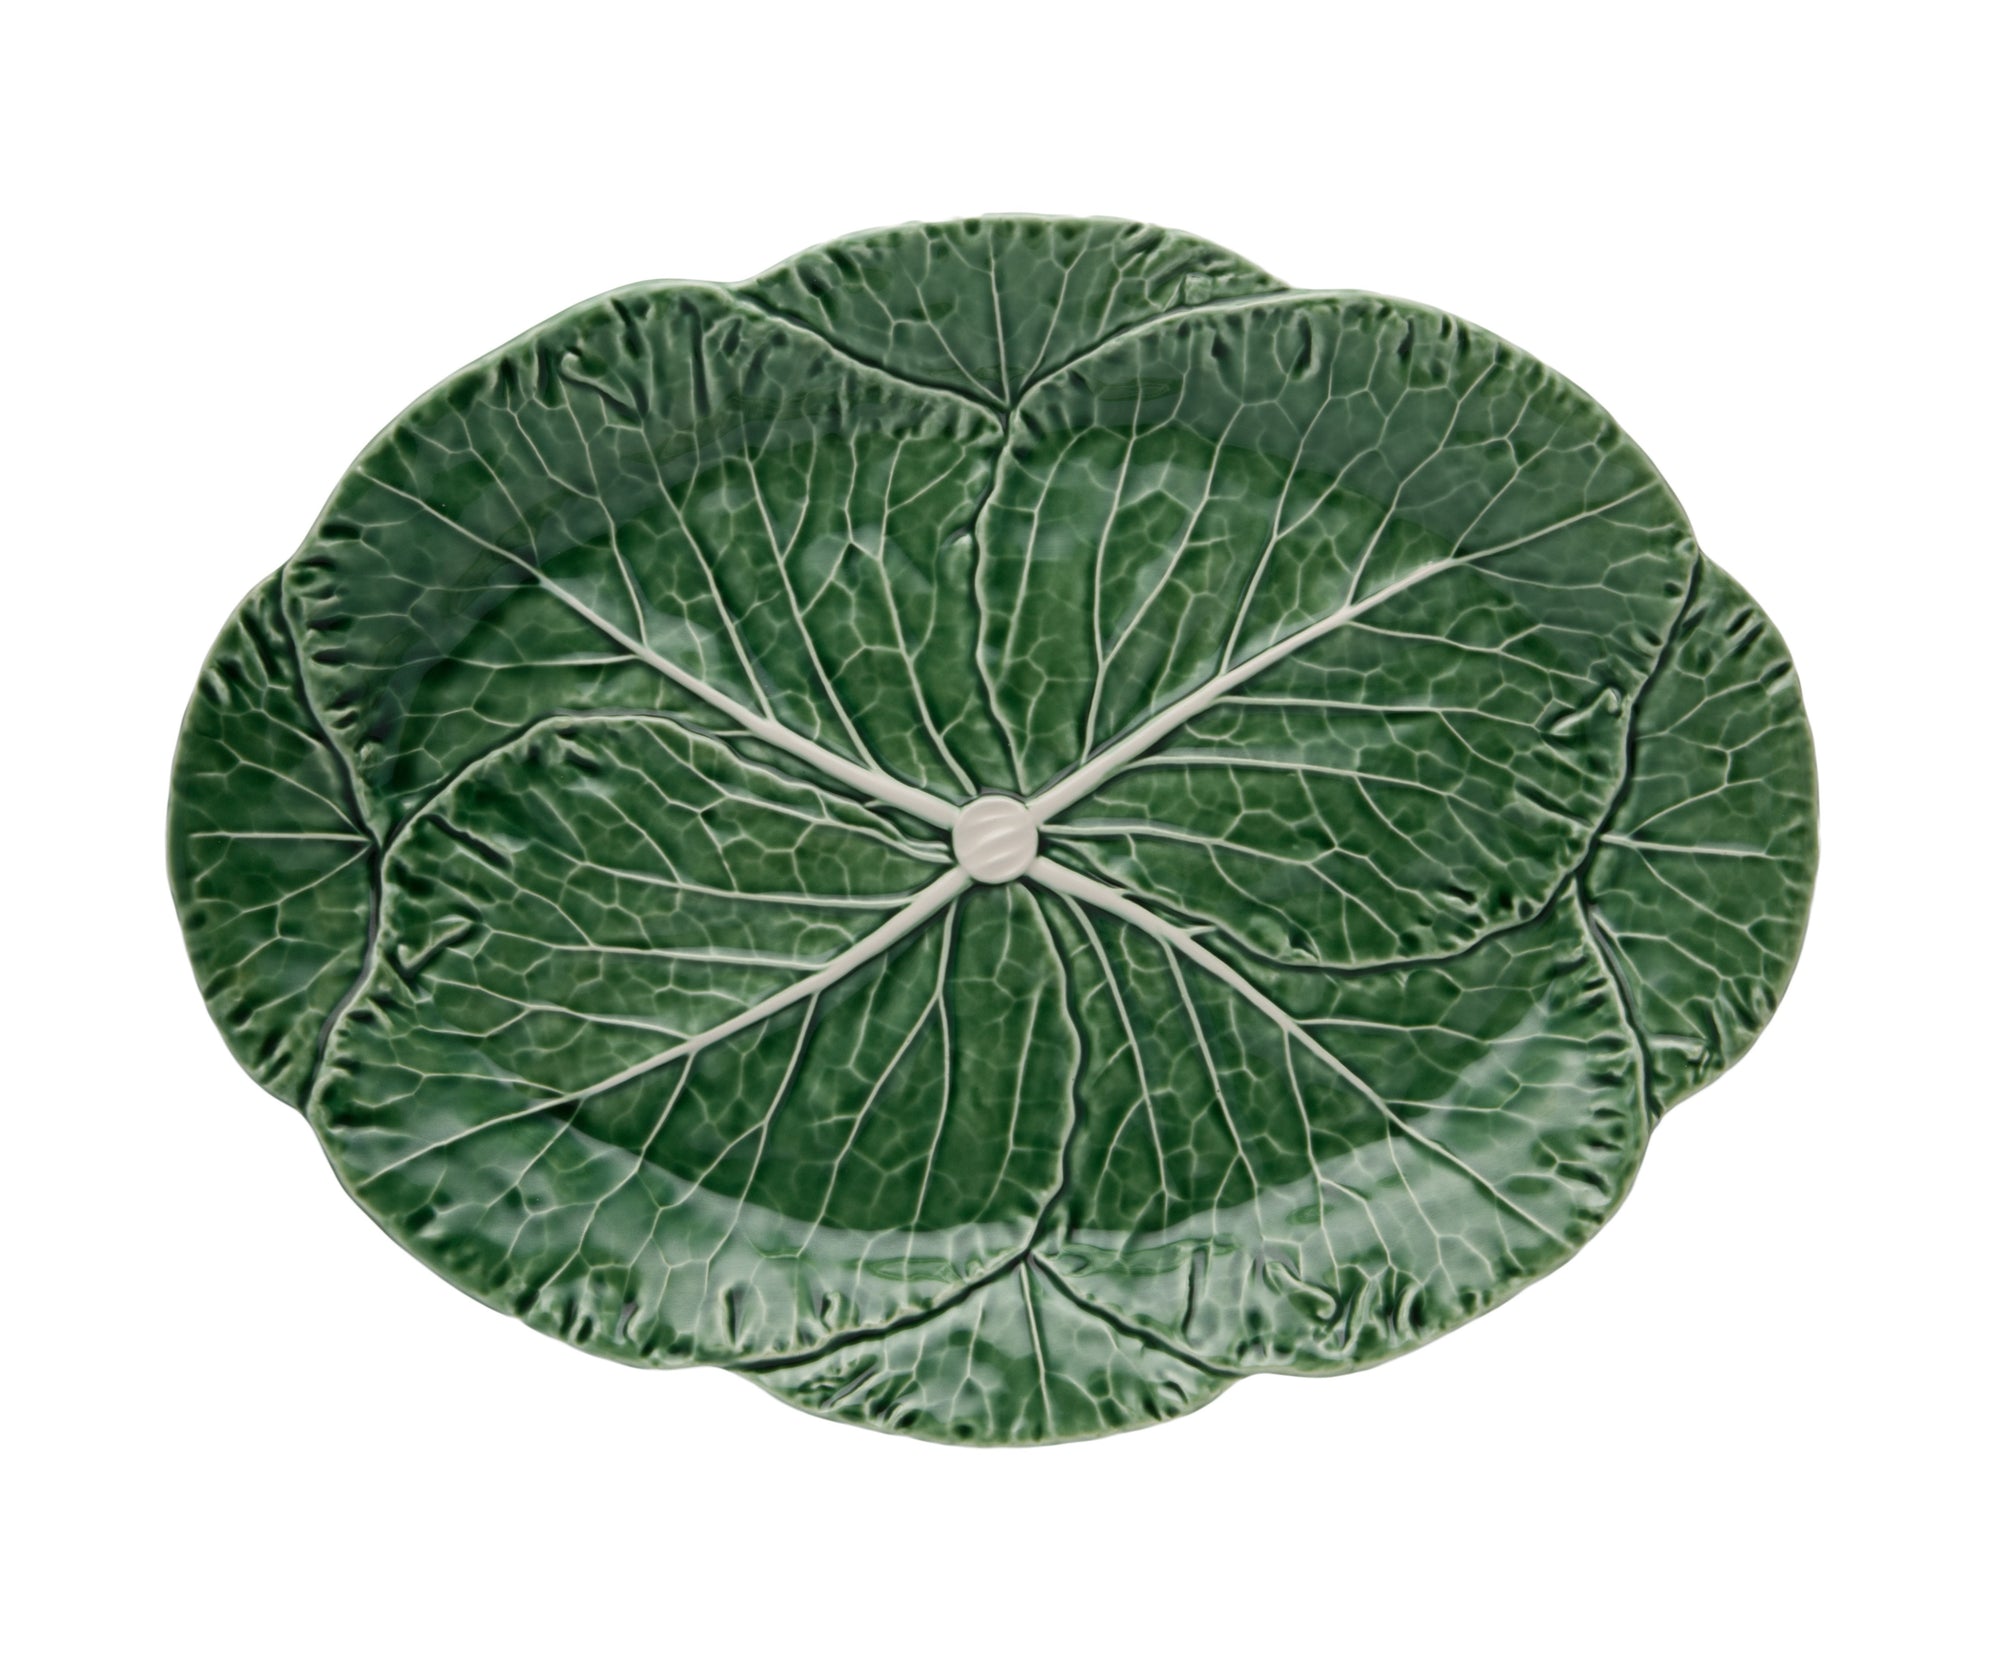 Cabbage Oval Platter 17" Green